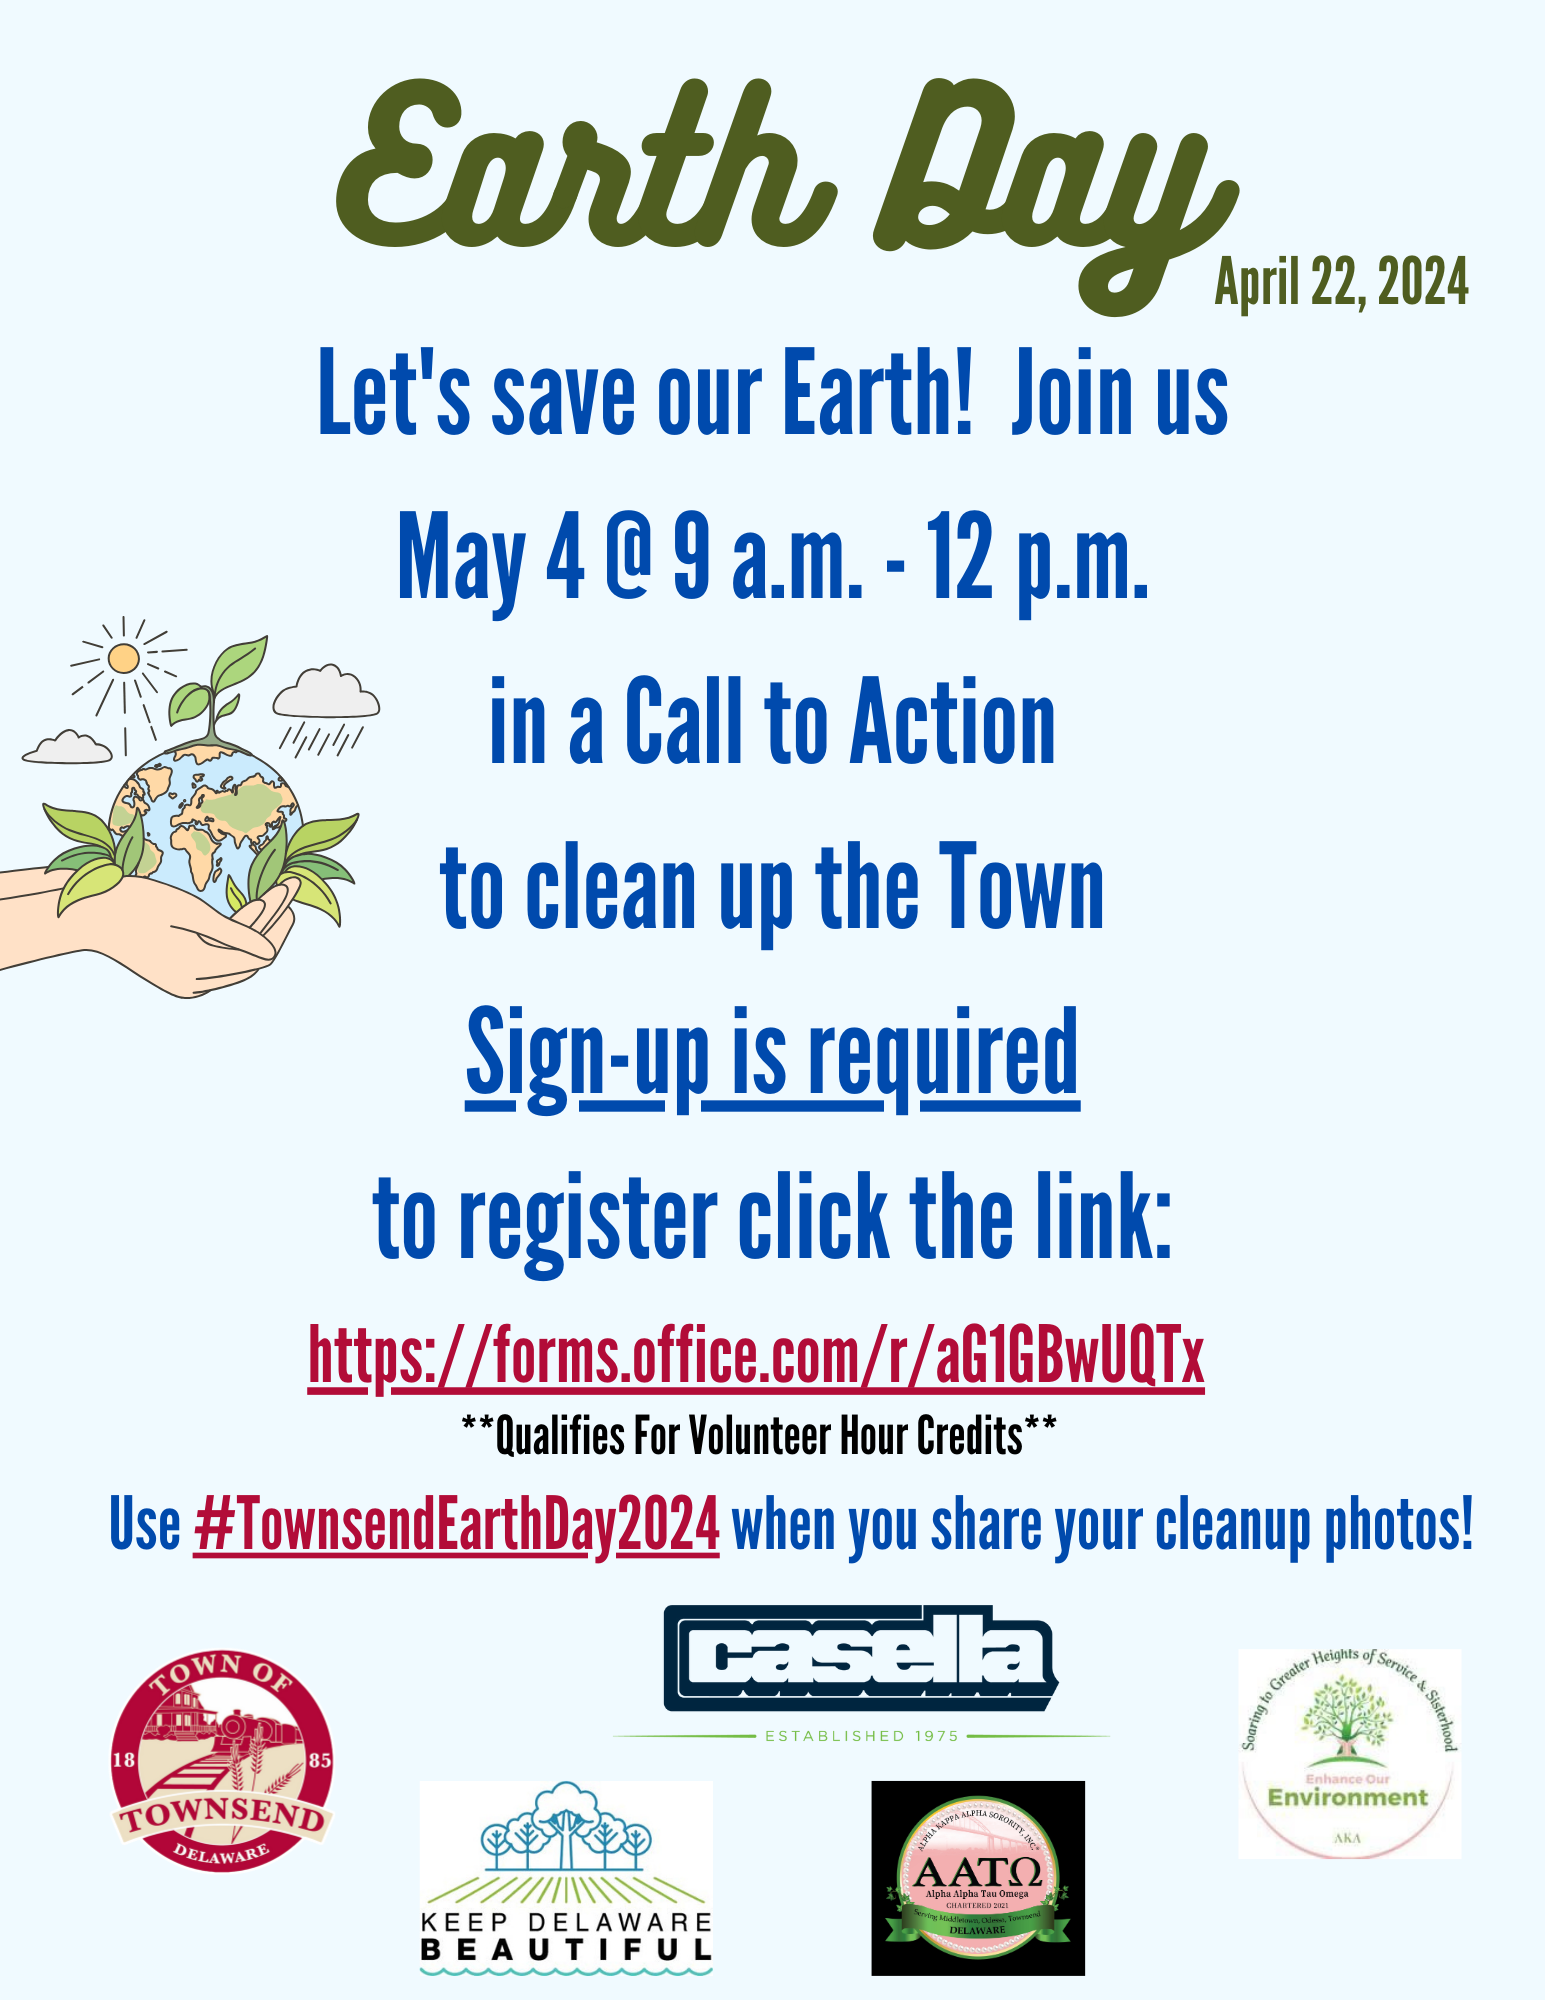 Earth Day April 22, 2024 Let's save our Earth! Join us May 4 @ 9 a.m. - 12 p.m. in a Call to Action to clean up the Town Sign-up is required to register click the link: https://forms.office.com/r/aG1GBwUQTx Qualifies for Volunteer Hour Credits Use #TownsendEarthDay2024 when you share your cleanup photos!